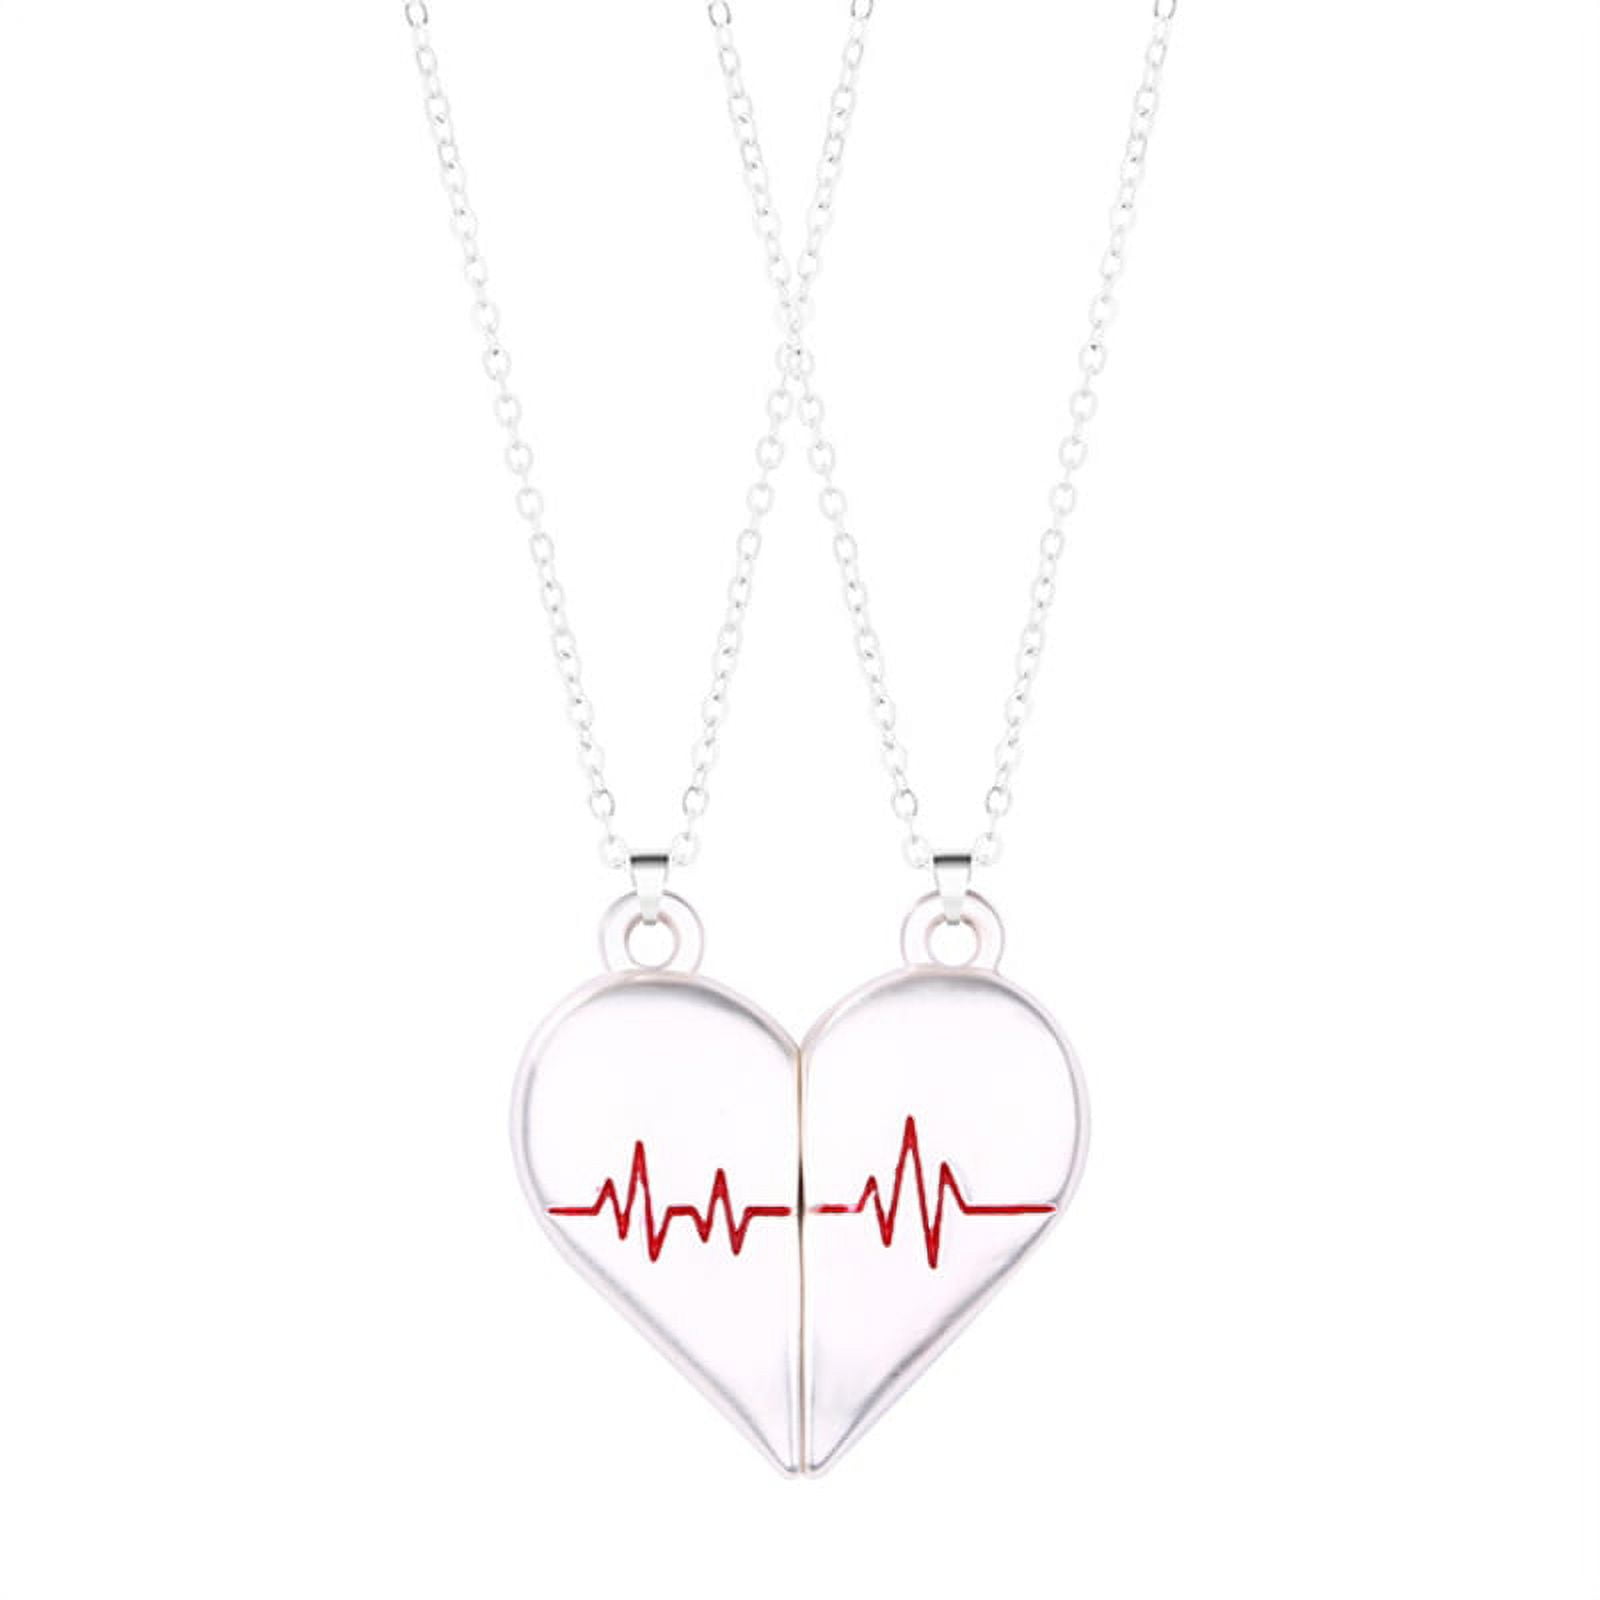 Magnetic Necklace,2 Pcs Magnetic Matching Heart Pendant Necklace,Wishing  Stone Creative Magnet Couples Necklace - Walmart.com